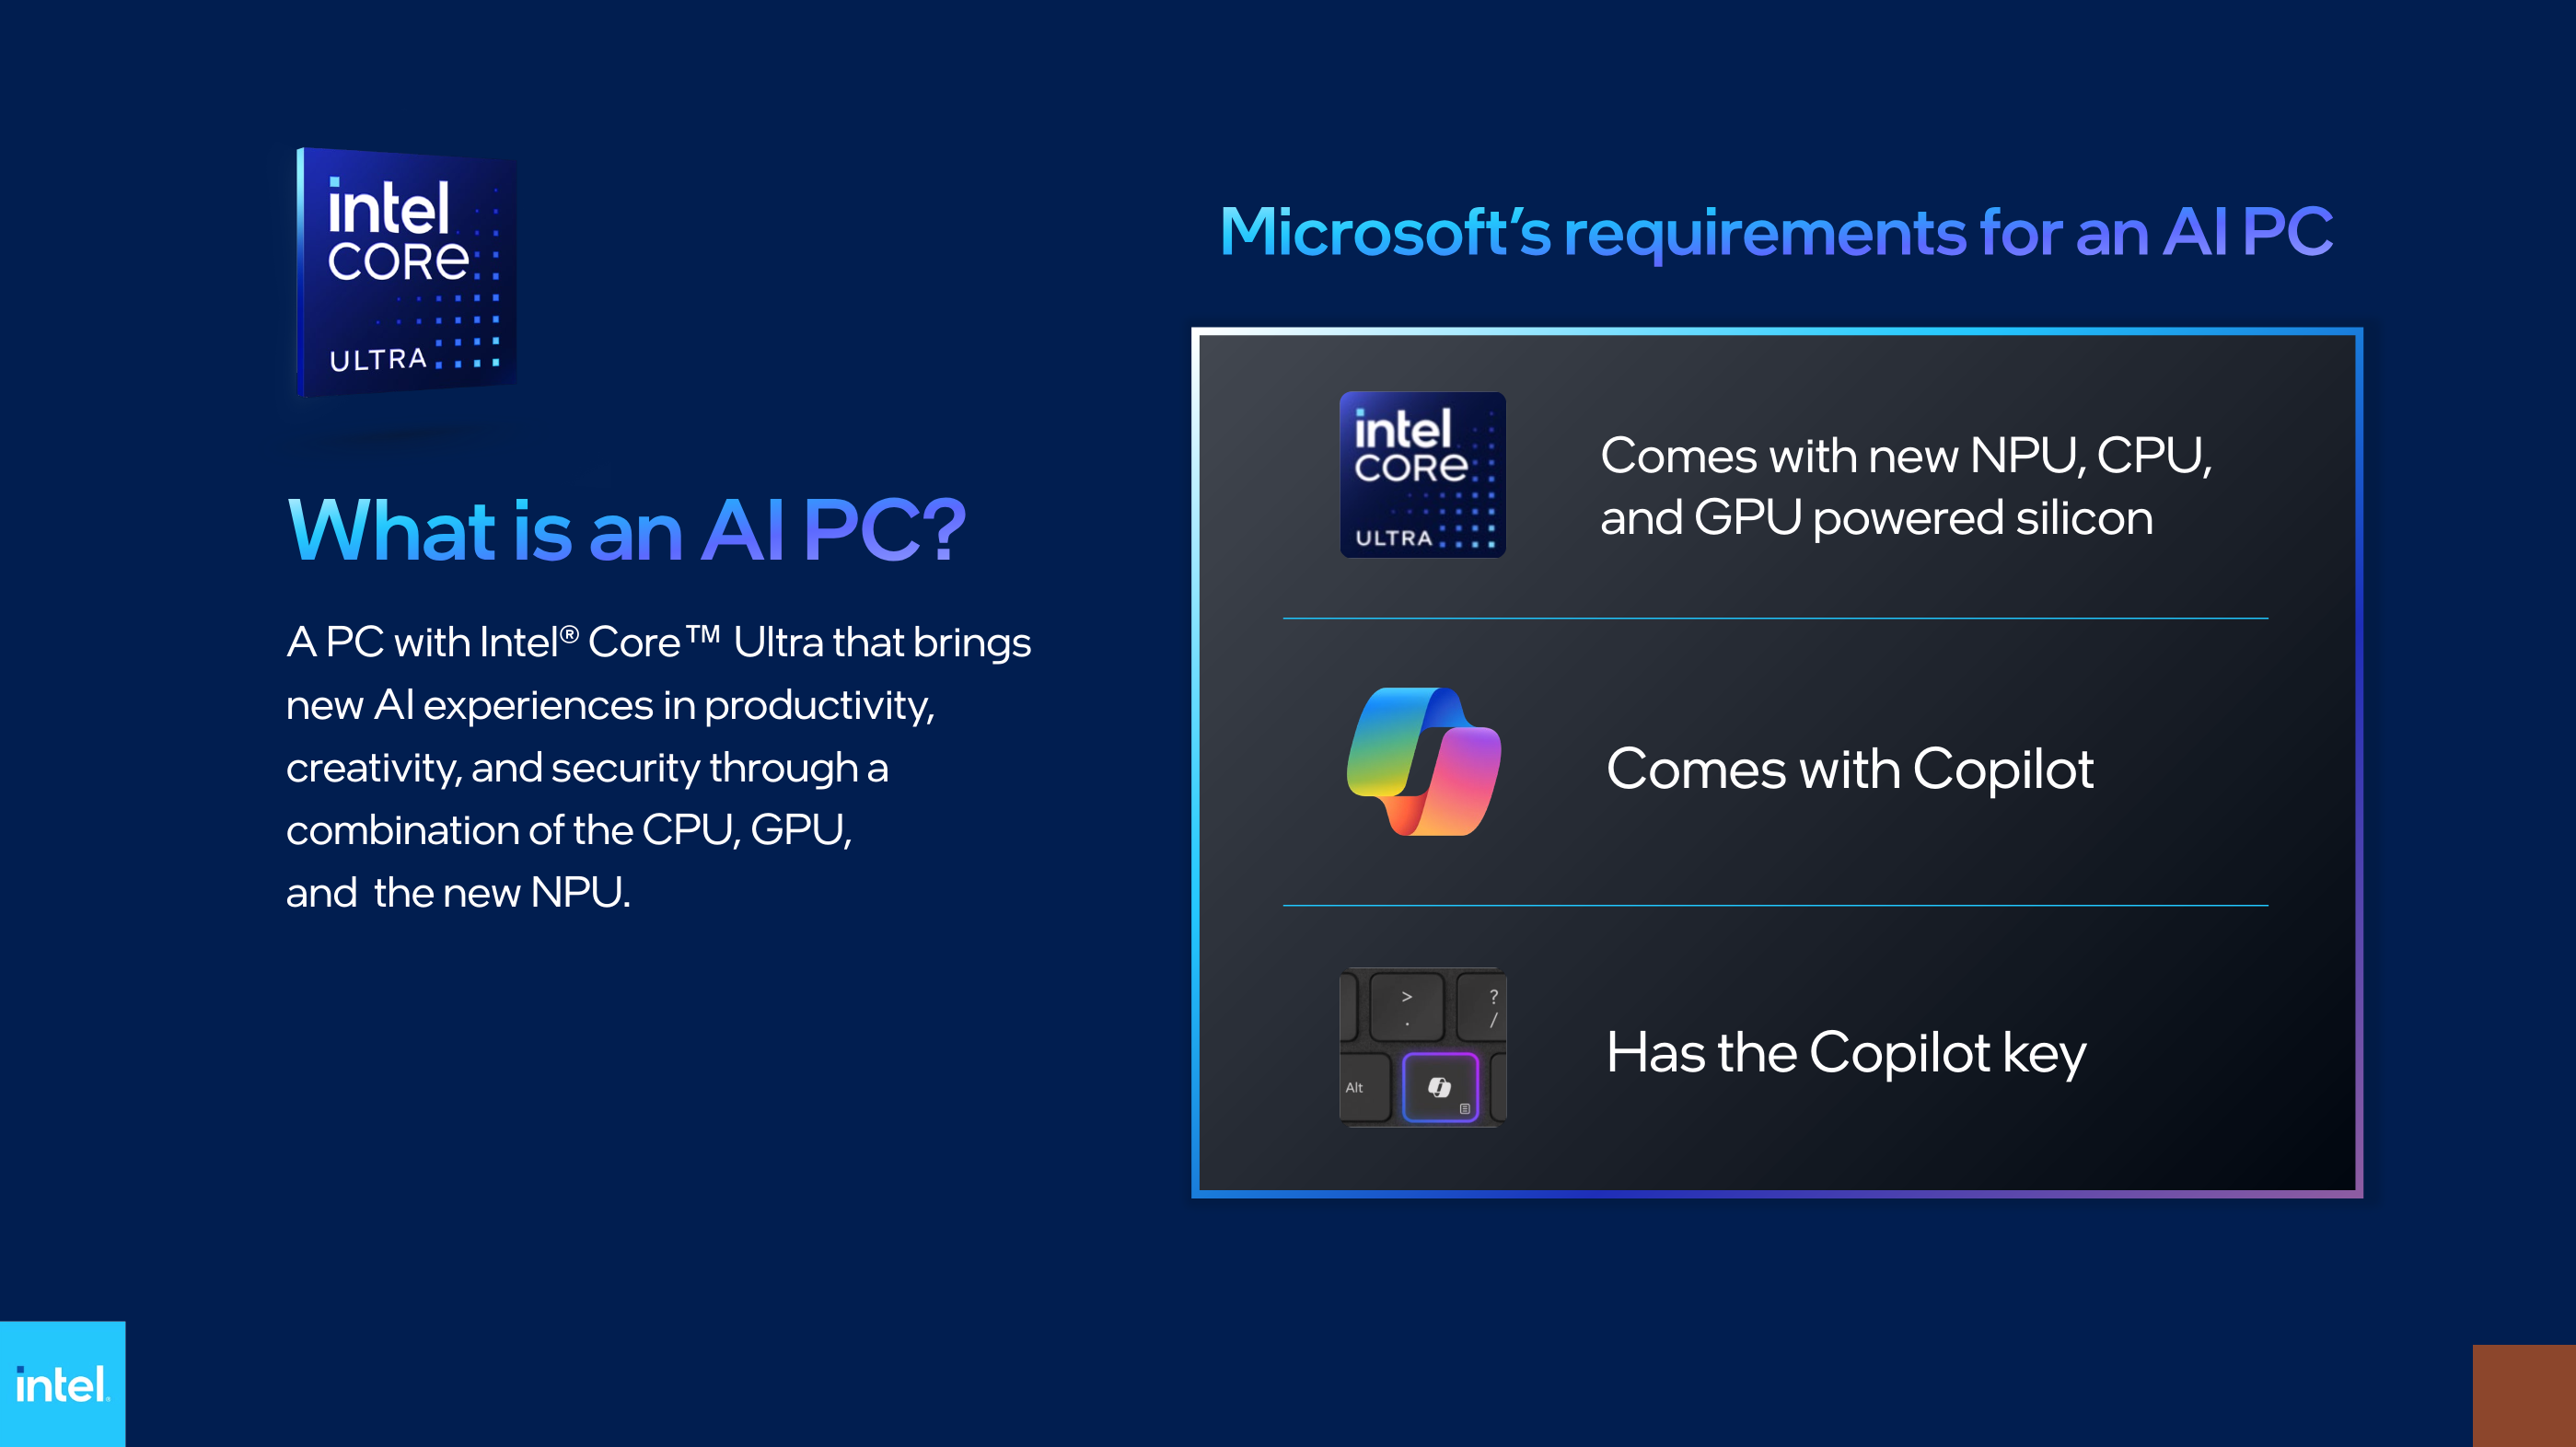 Microsoft requires AI computers to have a separate Copilot key - Intel-2